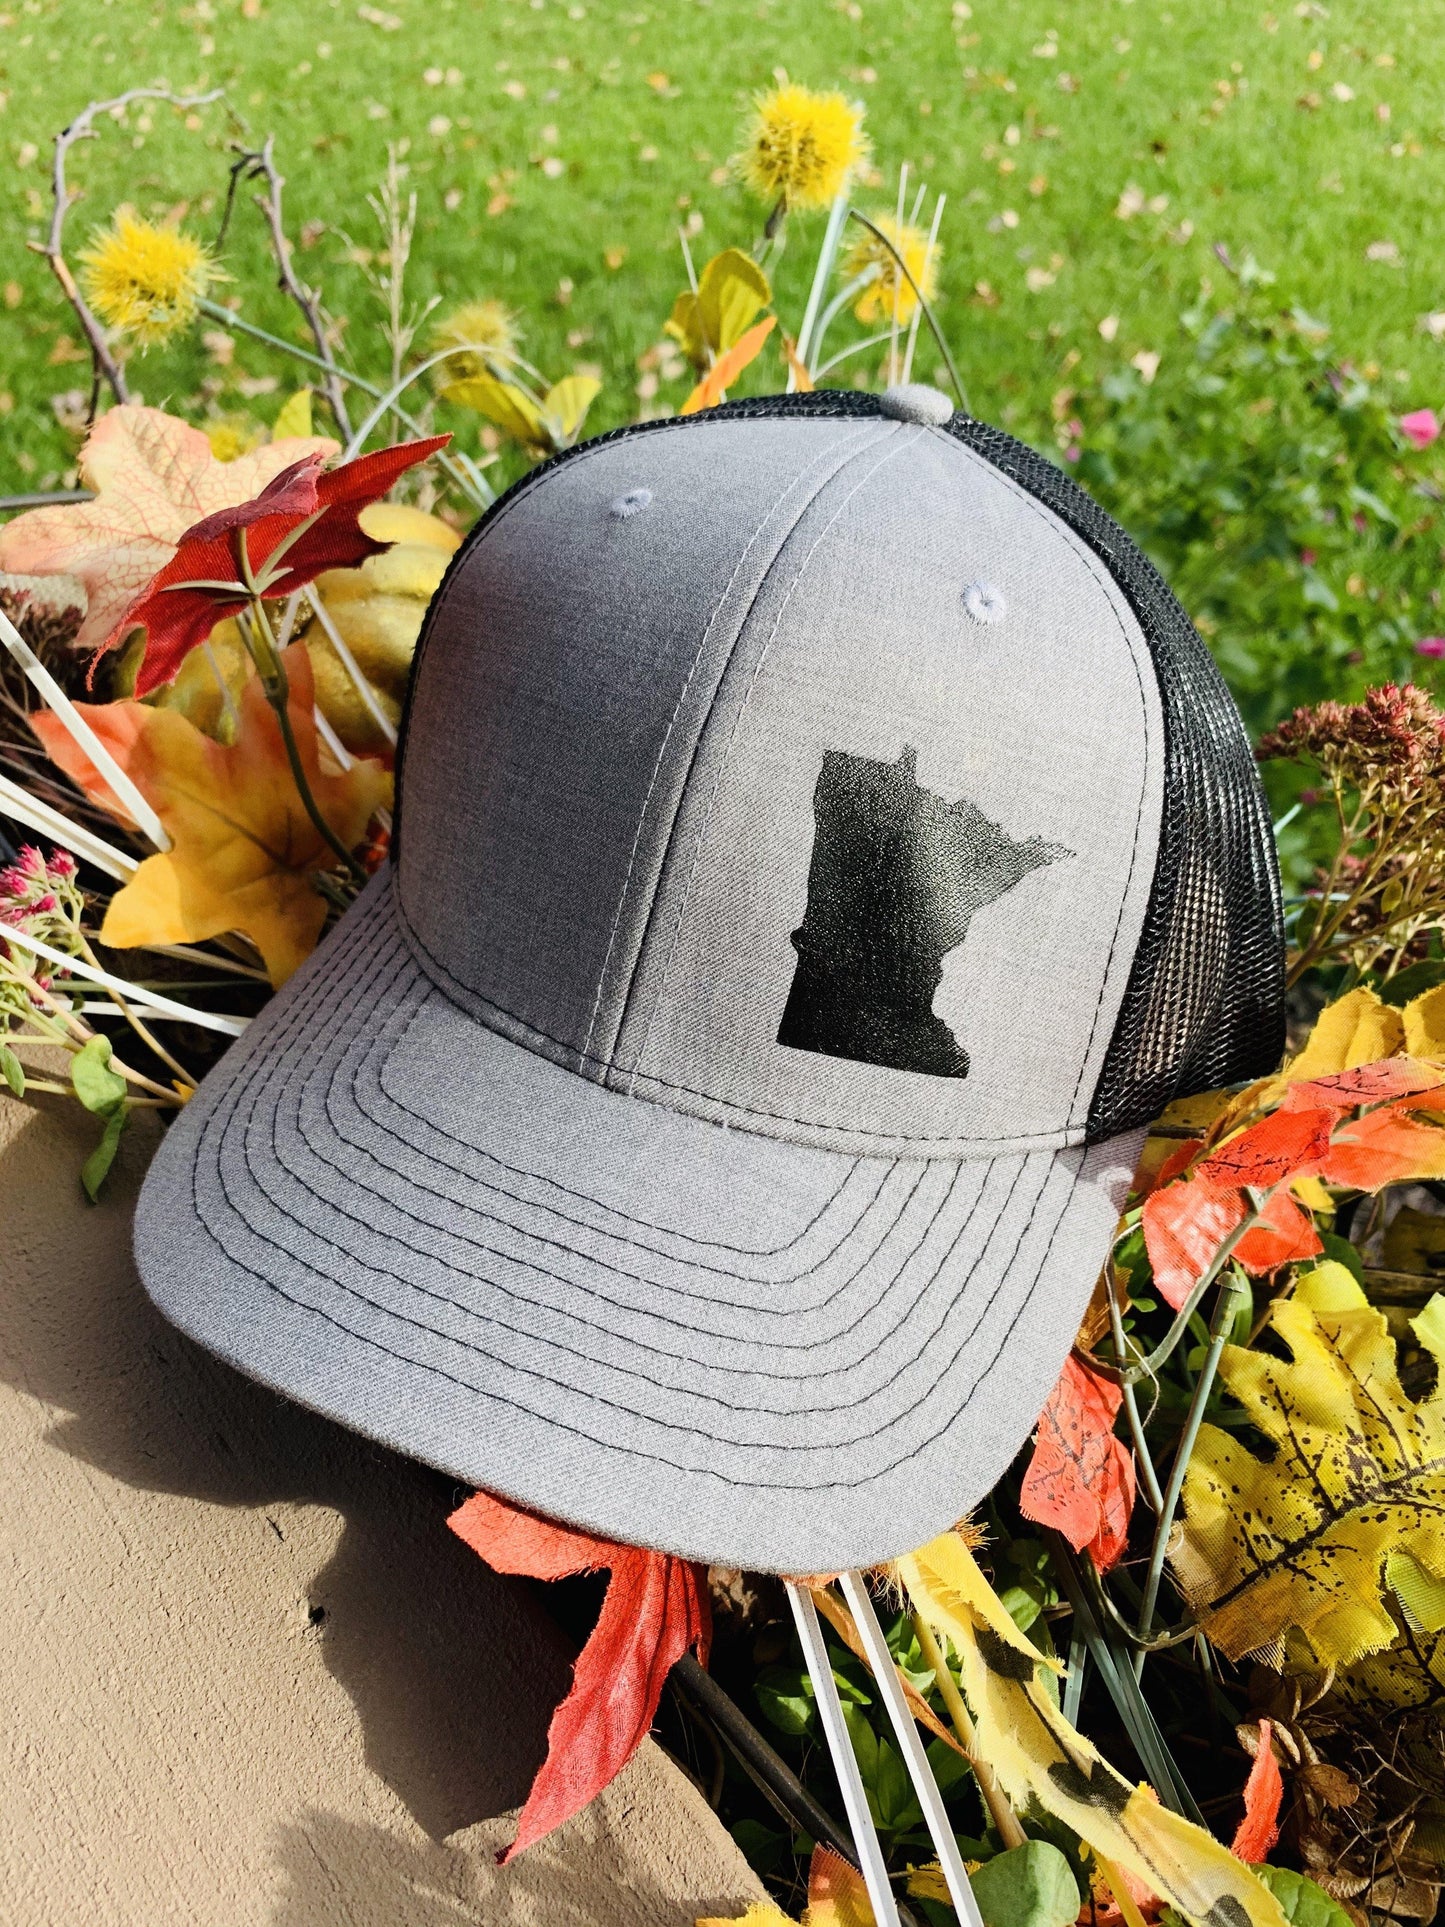 Hats { Minnesota } Gray trucker cap black mesh back adjustable snapback. Choose any state. Unisex. - Stacy's Pink Martini Boutique